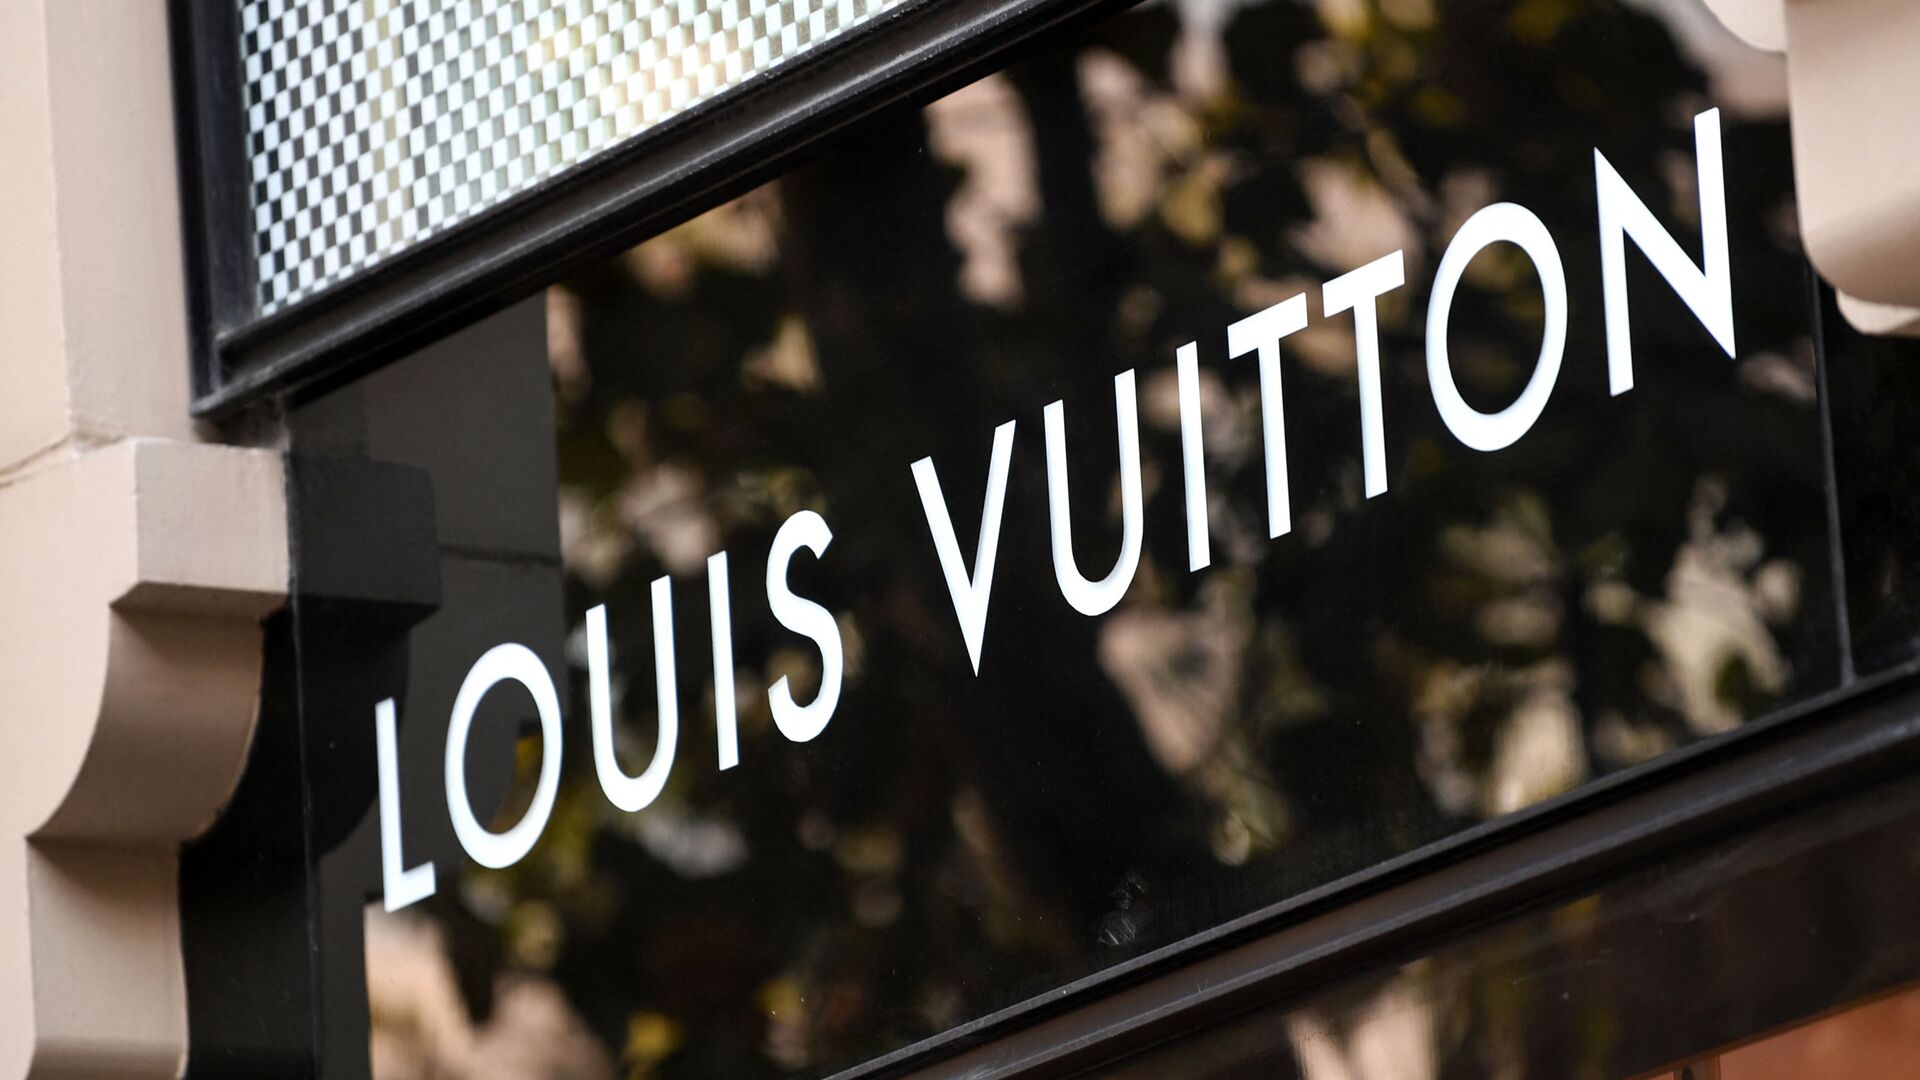 Are Louis Vuitton and Nordstrom appropriating Palestinian culture? - News